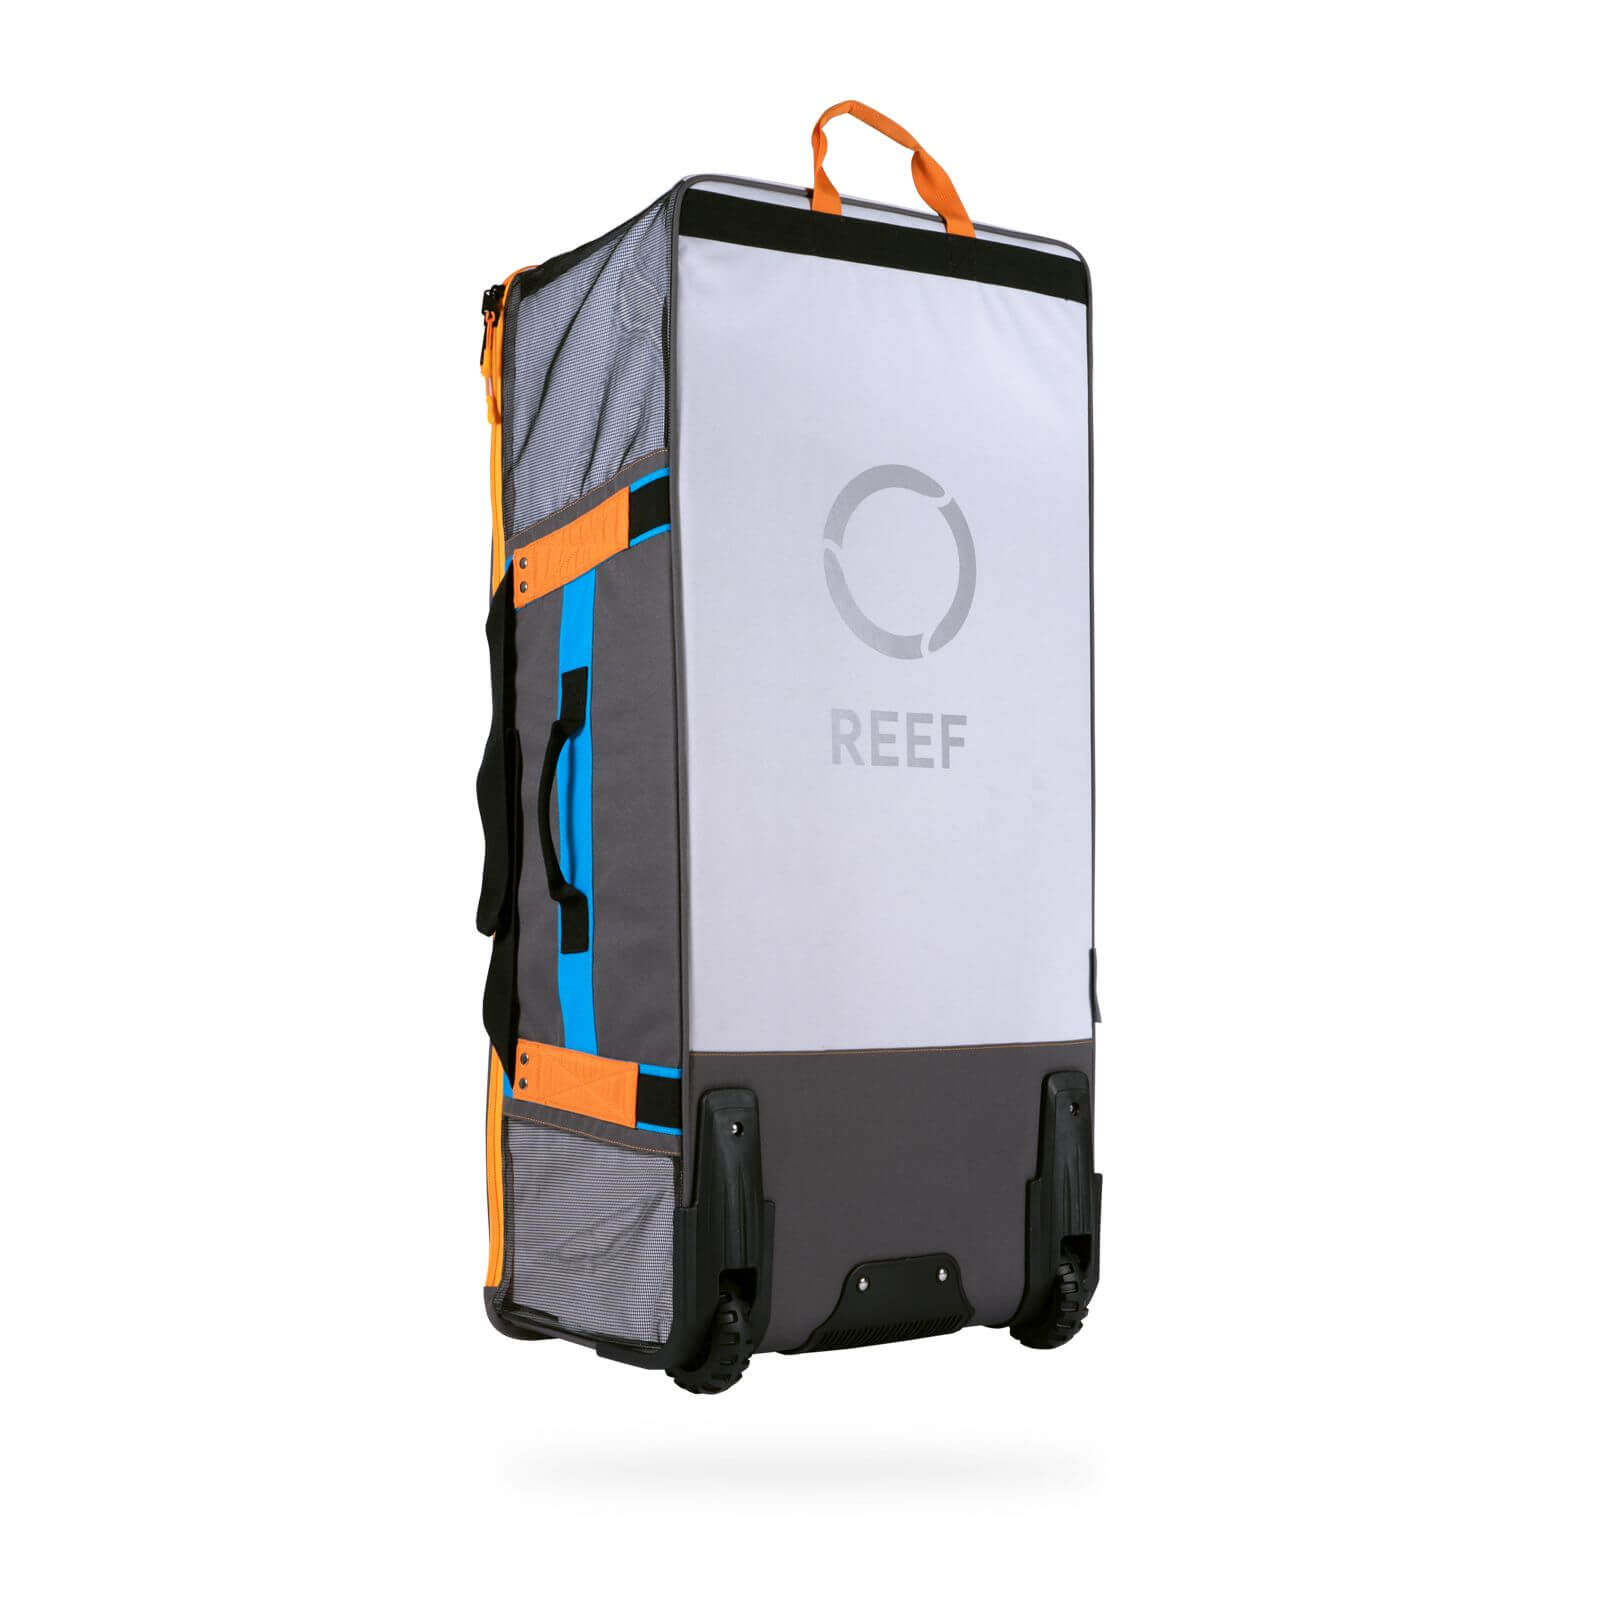 A blue and orange rolling bag with the word reef on it, perfect for carrying your Mission Reef Hex 82 Mat (11.5' X 11.5') or REEF HEX inflatable mats.